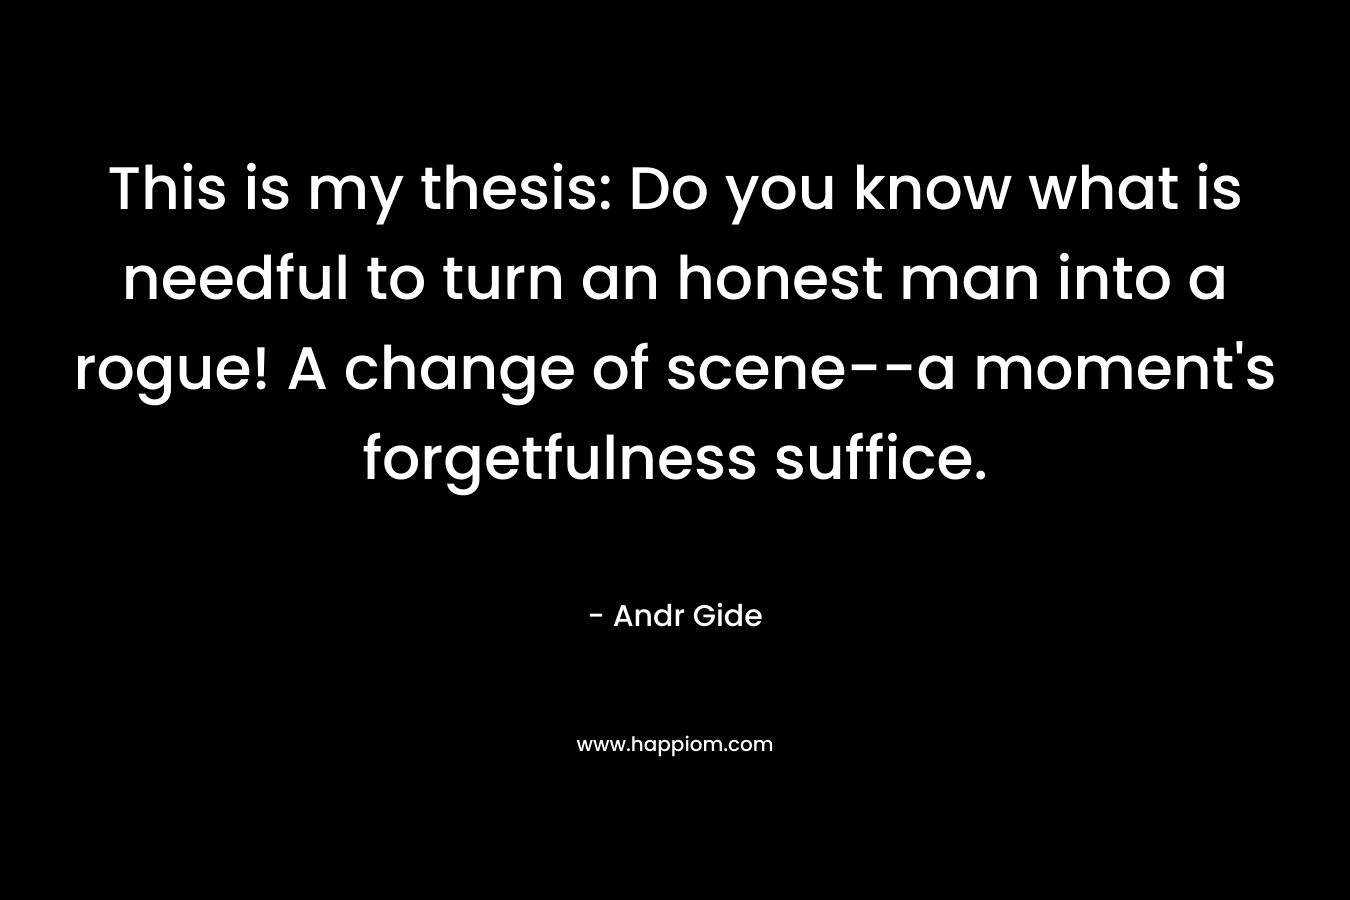 This is my thesis: Do you know what is needful to turn an honest man into a rogue! A change of scene–a moment’s forgetfulness suffice. – Andr Gide